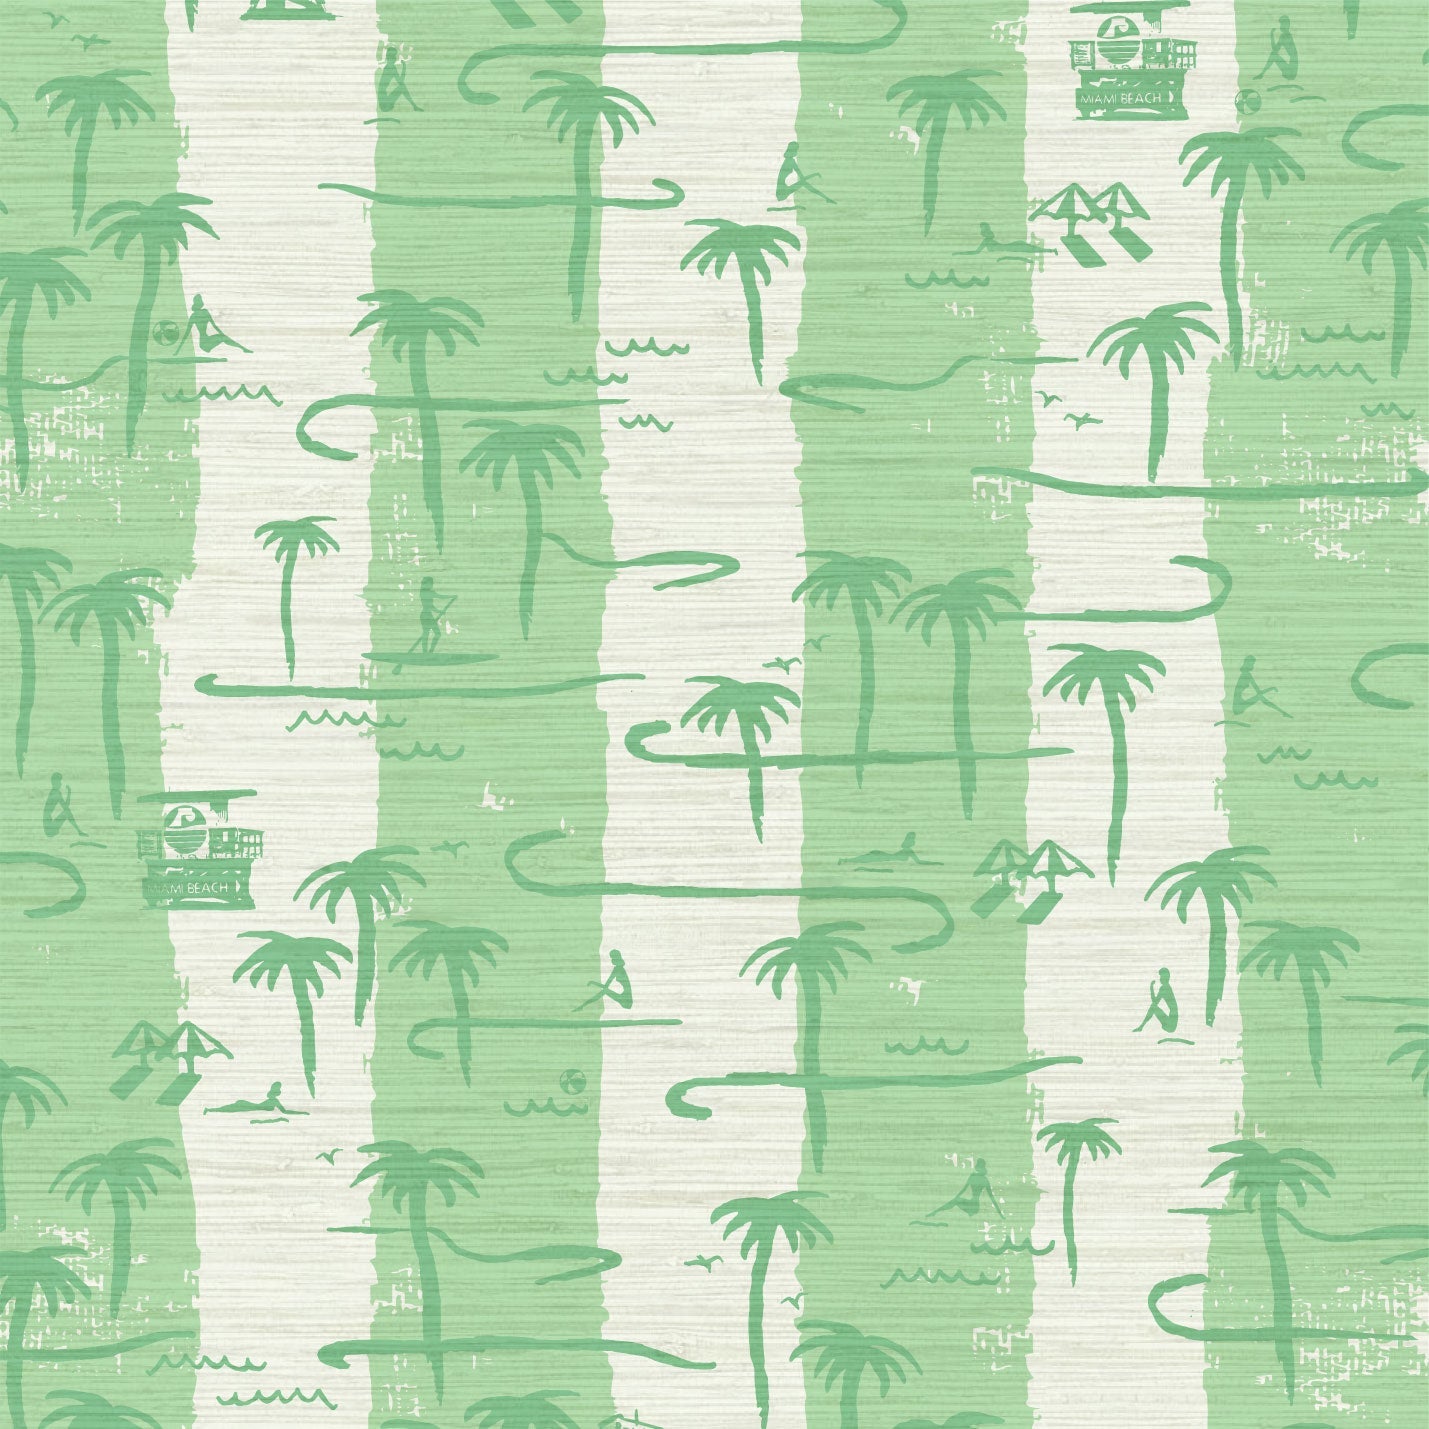 Load image into Gallery viewer, two color vertical stripe beach print featuring palm trees, beachgoers, lifeguard stands and ocean waves Grasscloth Natural Textured Eco-Friendly Non-toxic High-quality Sustainable practices Sustainability Interior Design Wall covering Bold Wallpaper Custom Tailor-made Retro chic Tropical Seaside Coastal Seashore Waterfront Vacation home styling Retreat Relaxed beach vibes Beach cottage Shoreline Oceanfront Nautical white green mint tropical jungle
